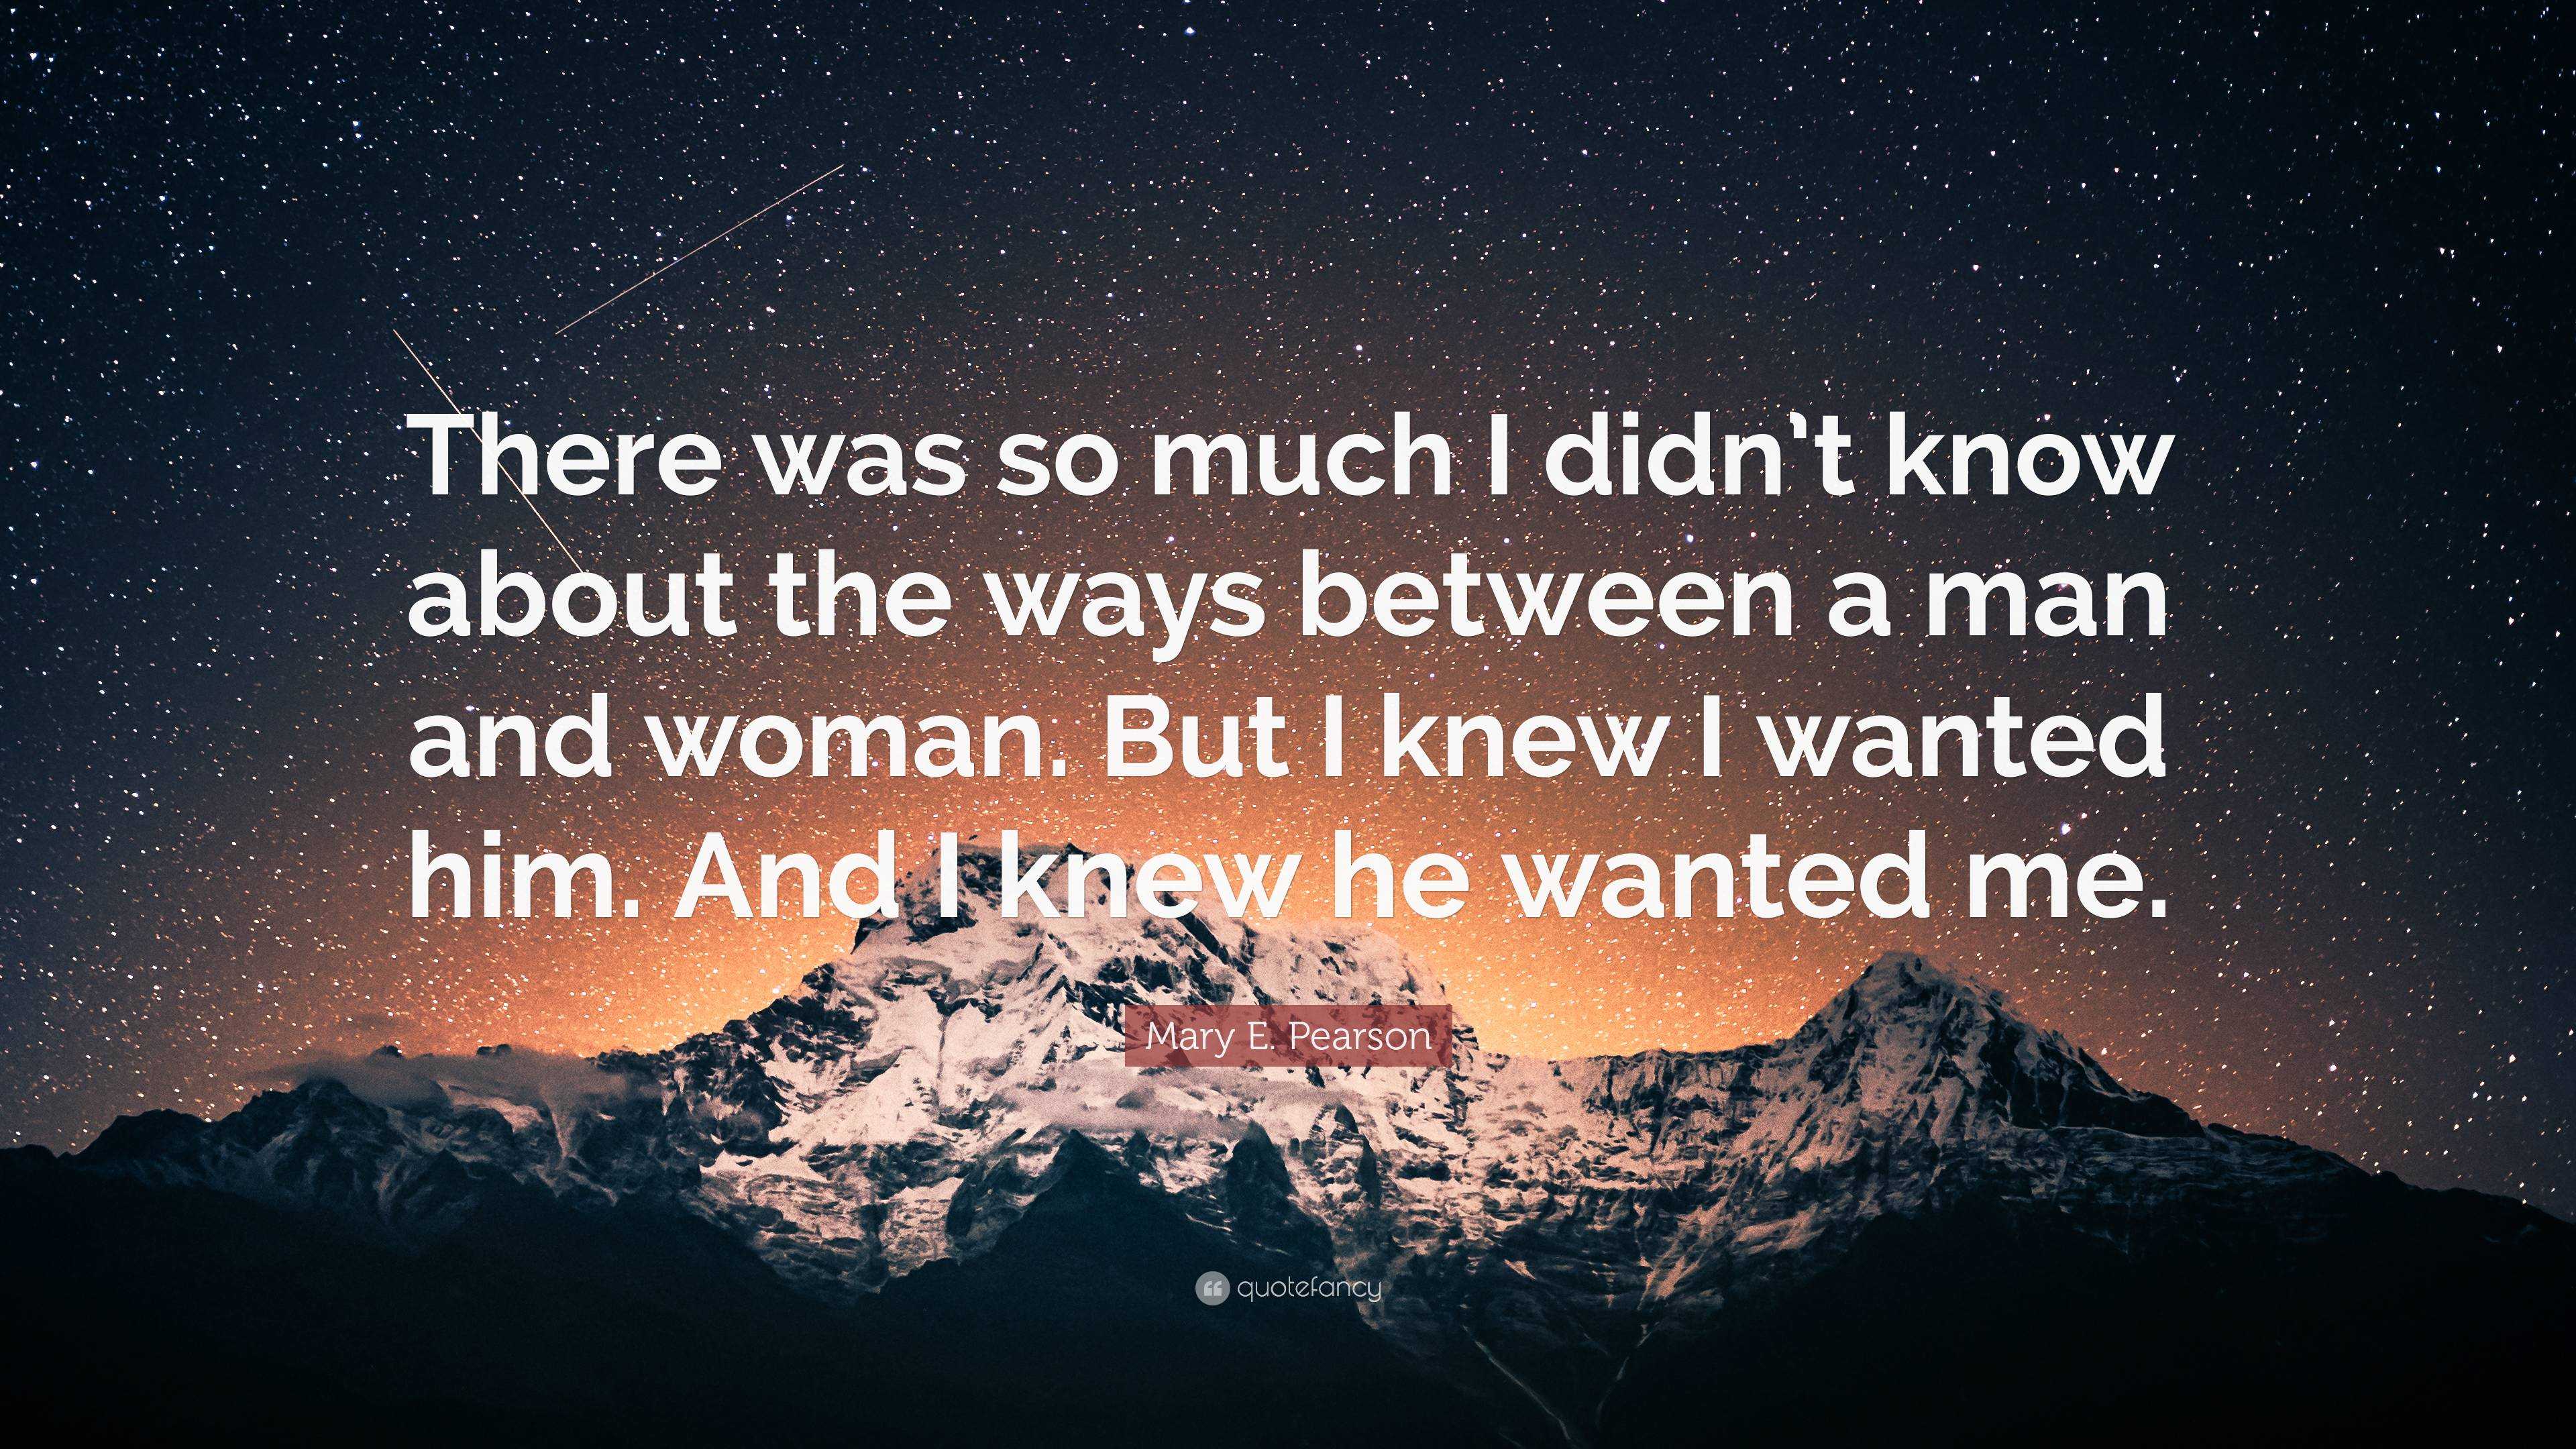 Mary E. Pearson Quote: “There was so much I didn’t know about the ways ...